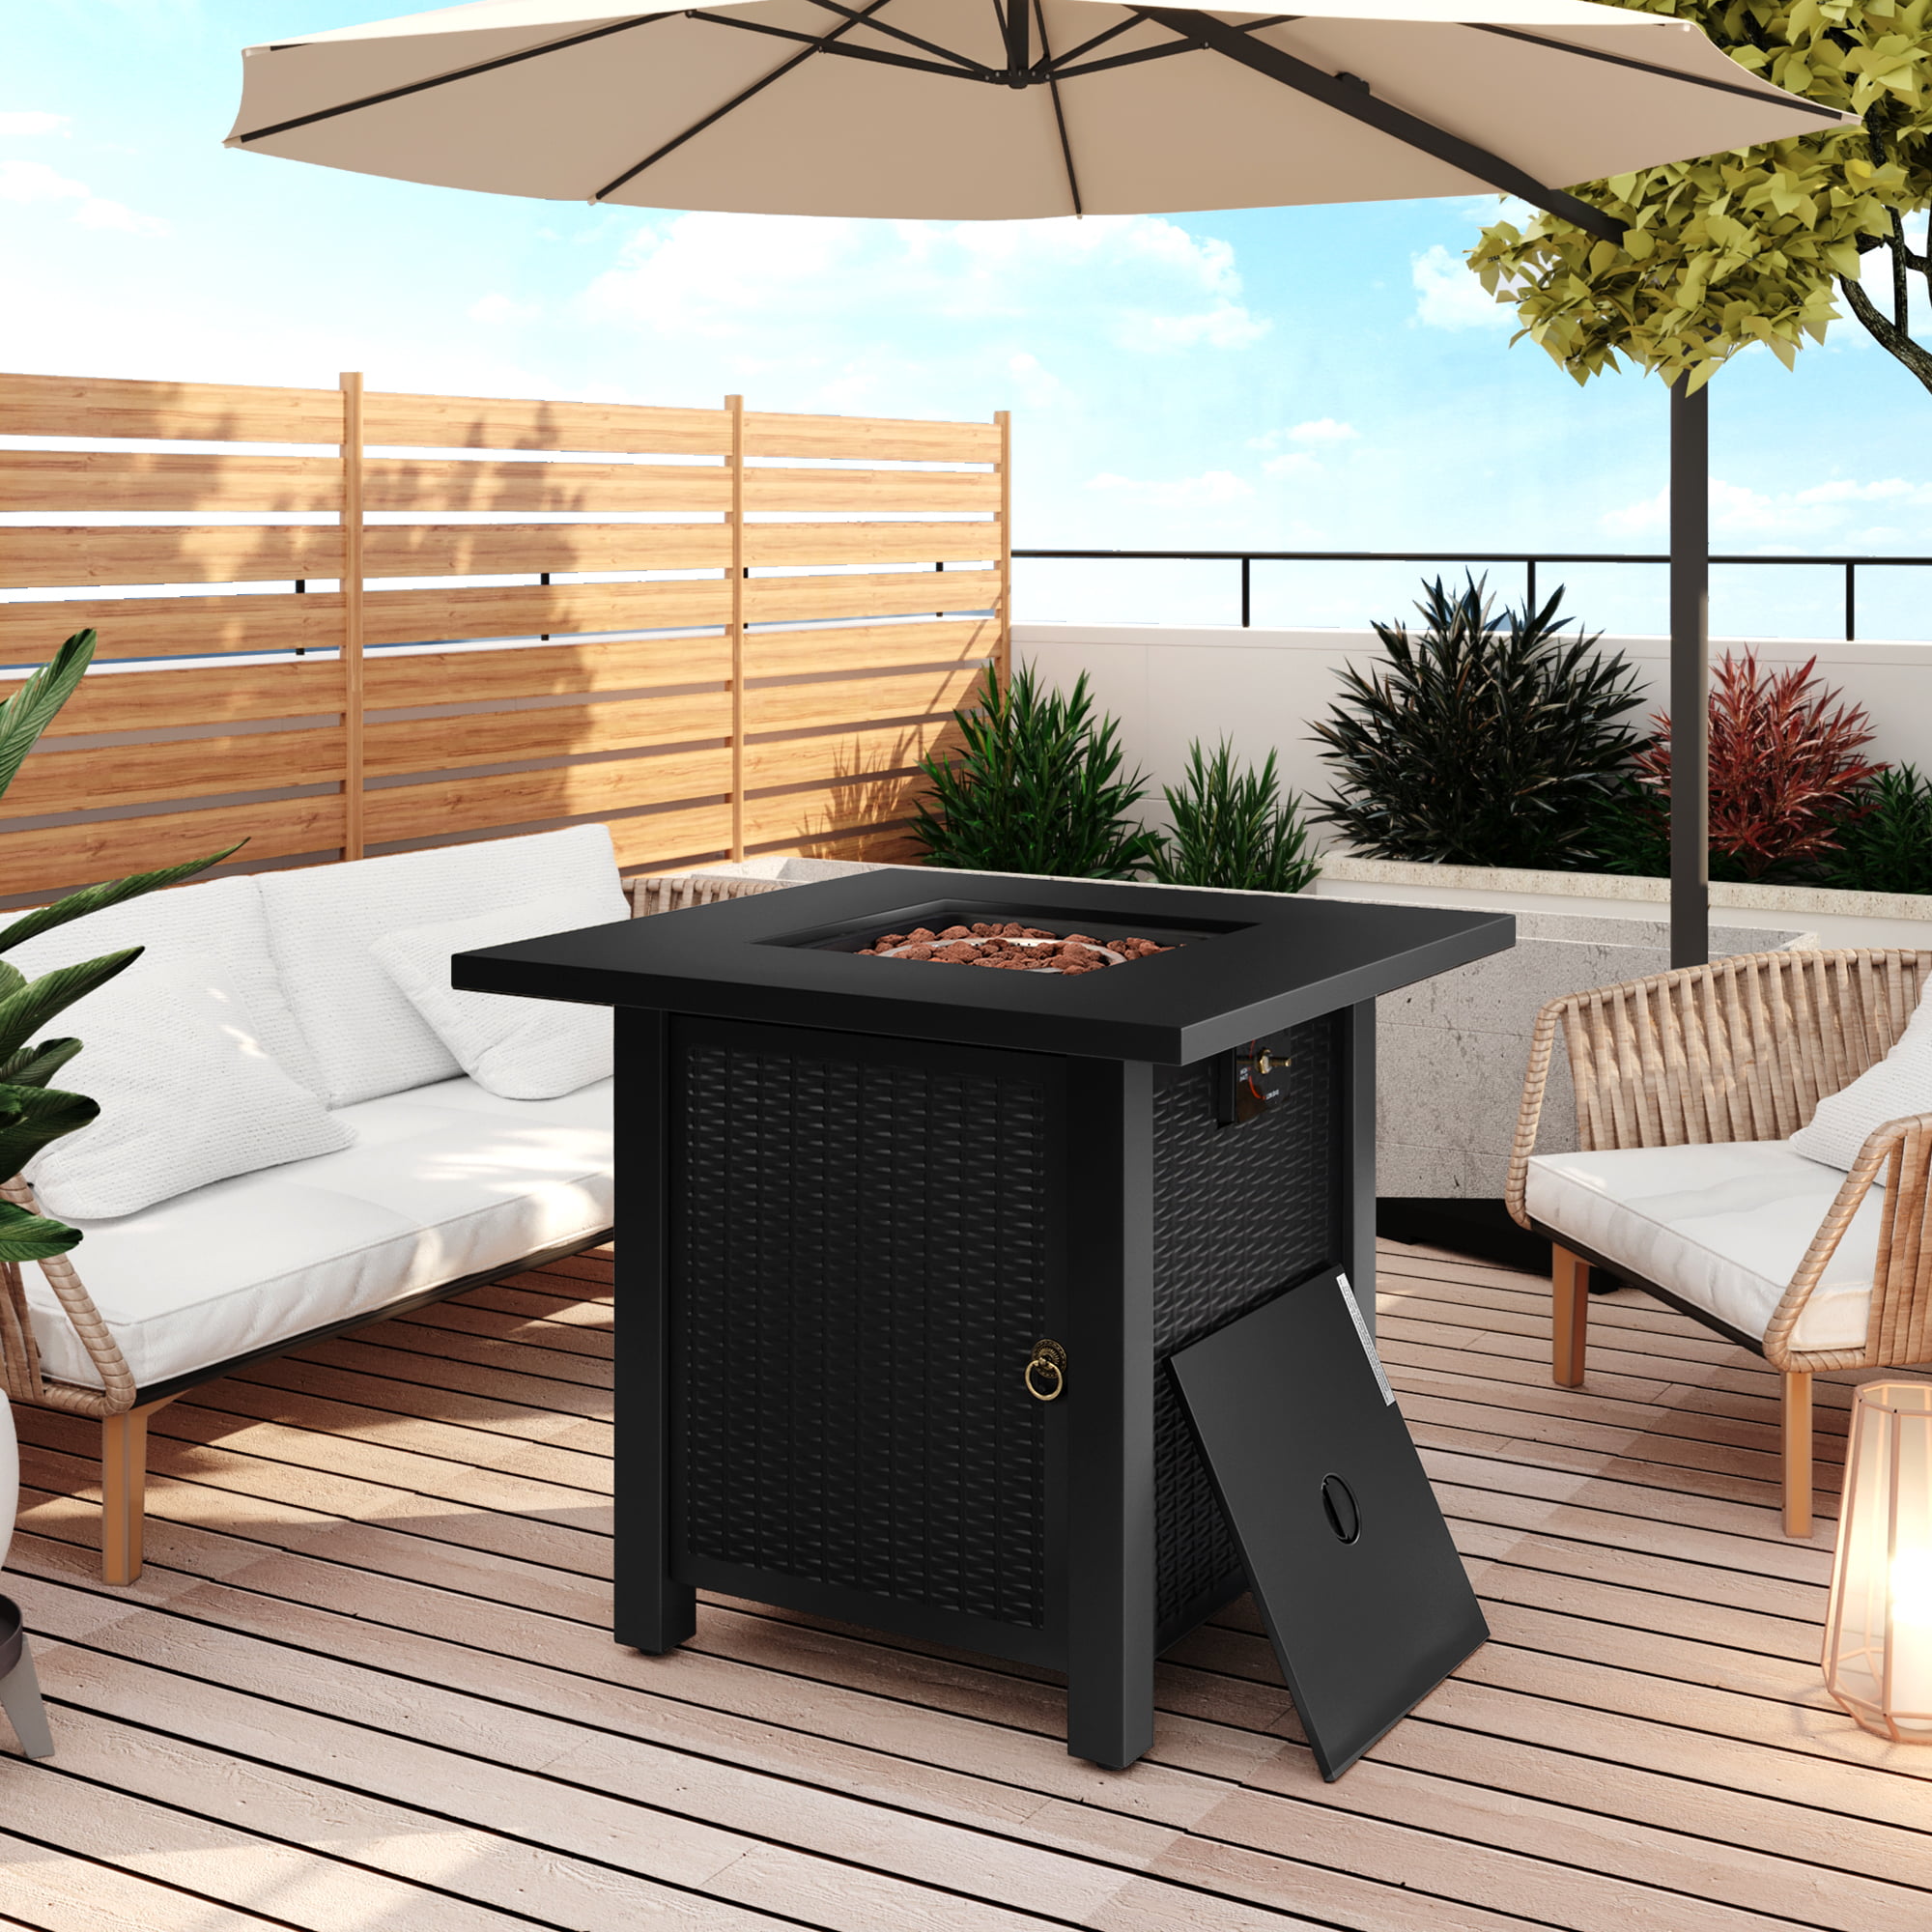 Outdoor Fire Pit Propane 28 Gas, What To Look For In A Fire Pit Table